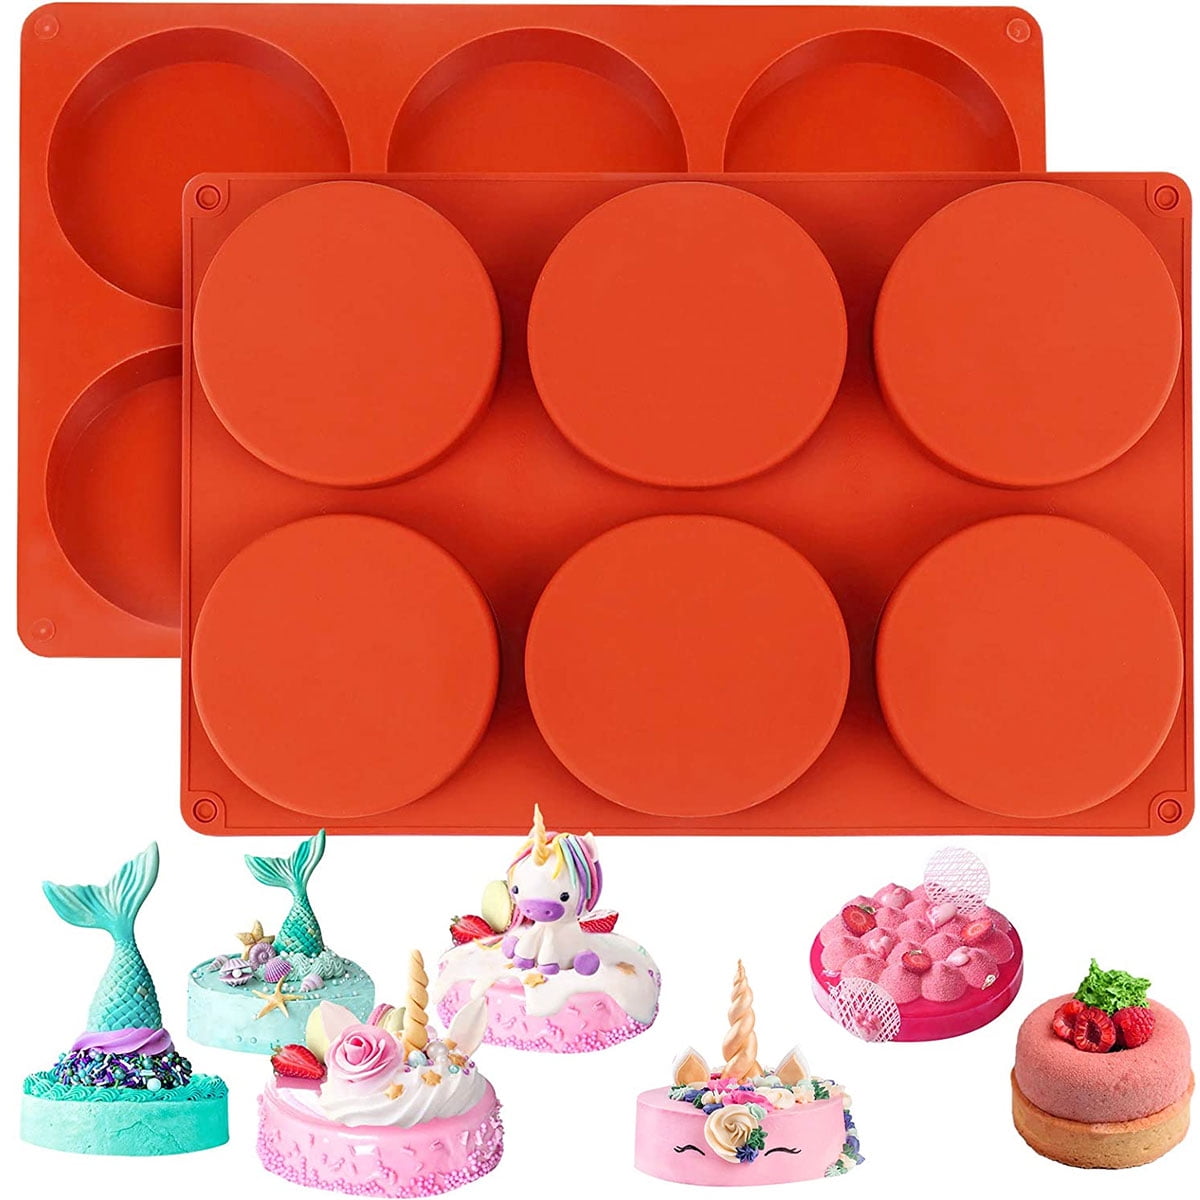 Baking Molds, Cake Molds, Square Silicone Muffin Cups, 6pcs/set